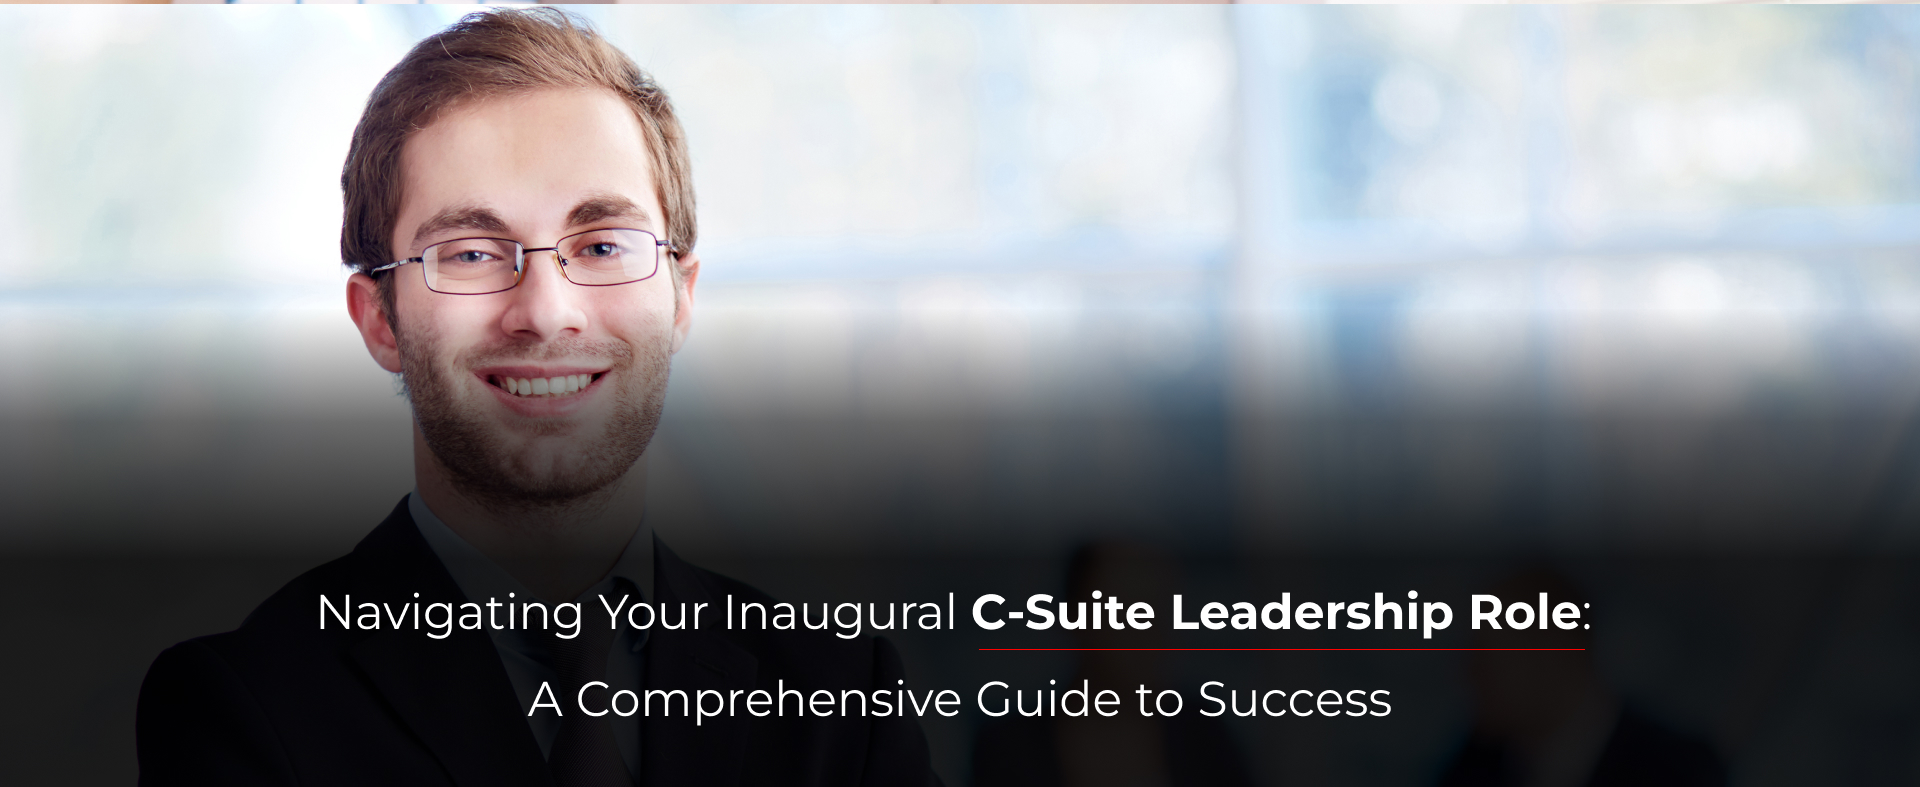 Navigating Your Inaugural C-Suite Leadership Role: A Comprehensive Guide to Success with Shrofile Executive Search